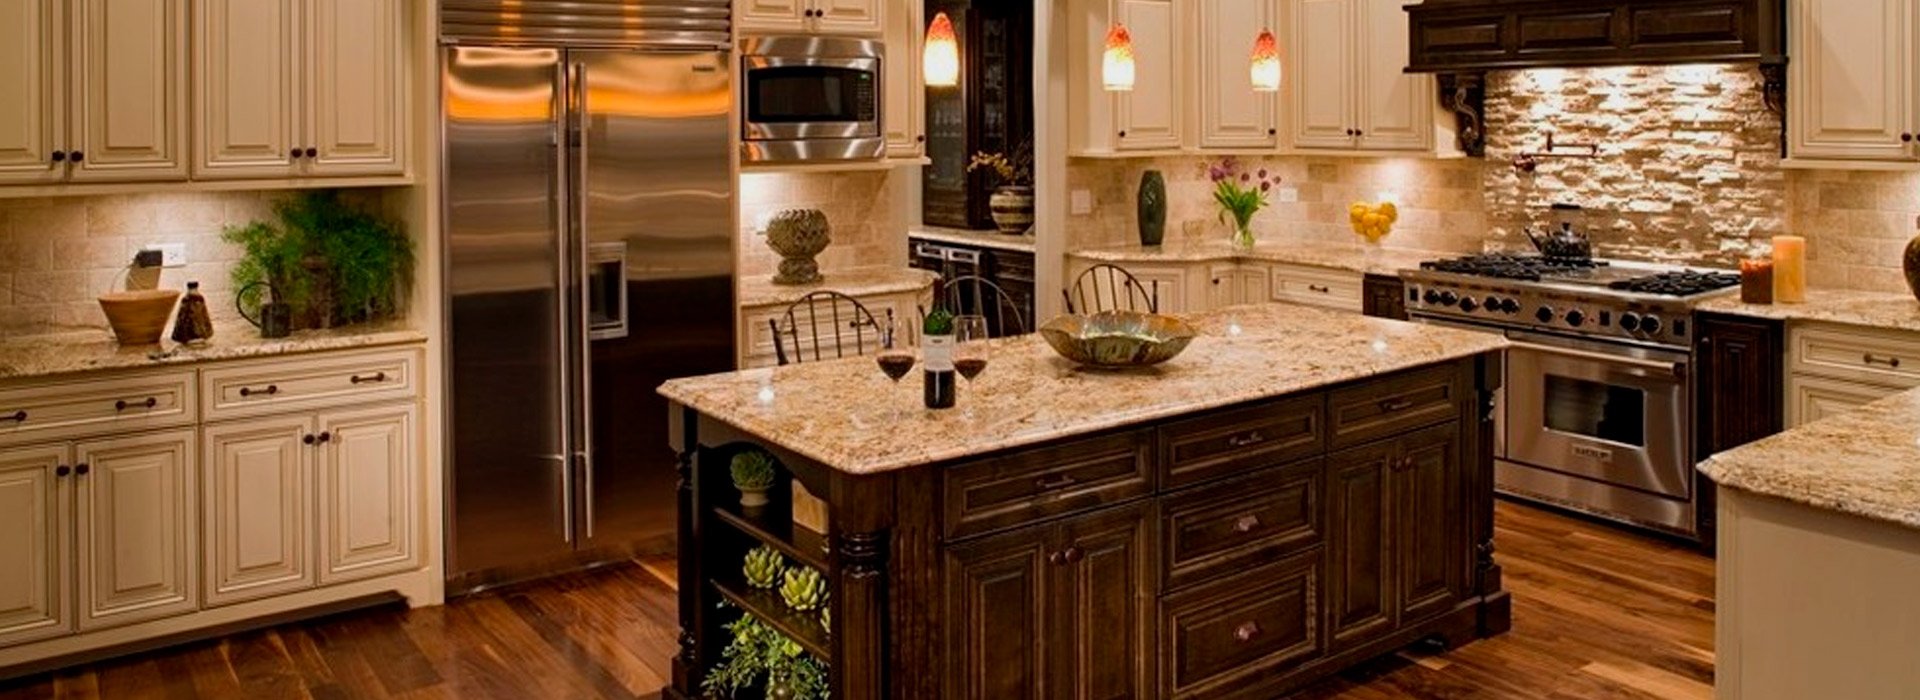 Welcome innovation and modern appeal into your estate through kitchen and bathroom remodeling